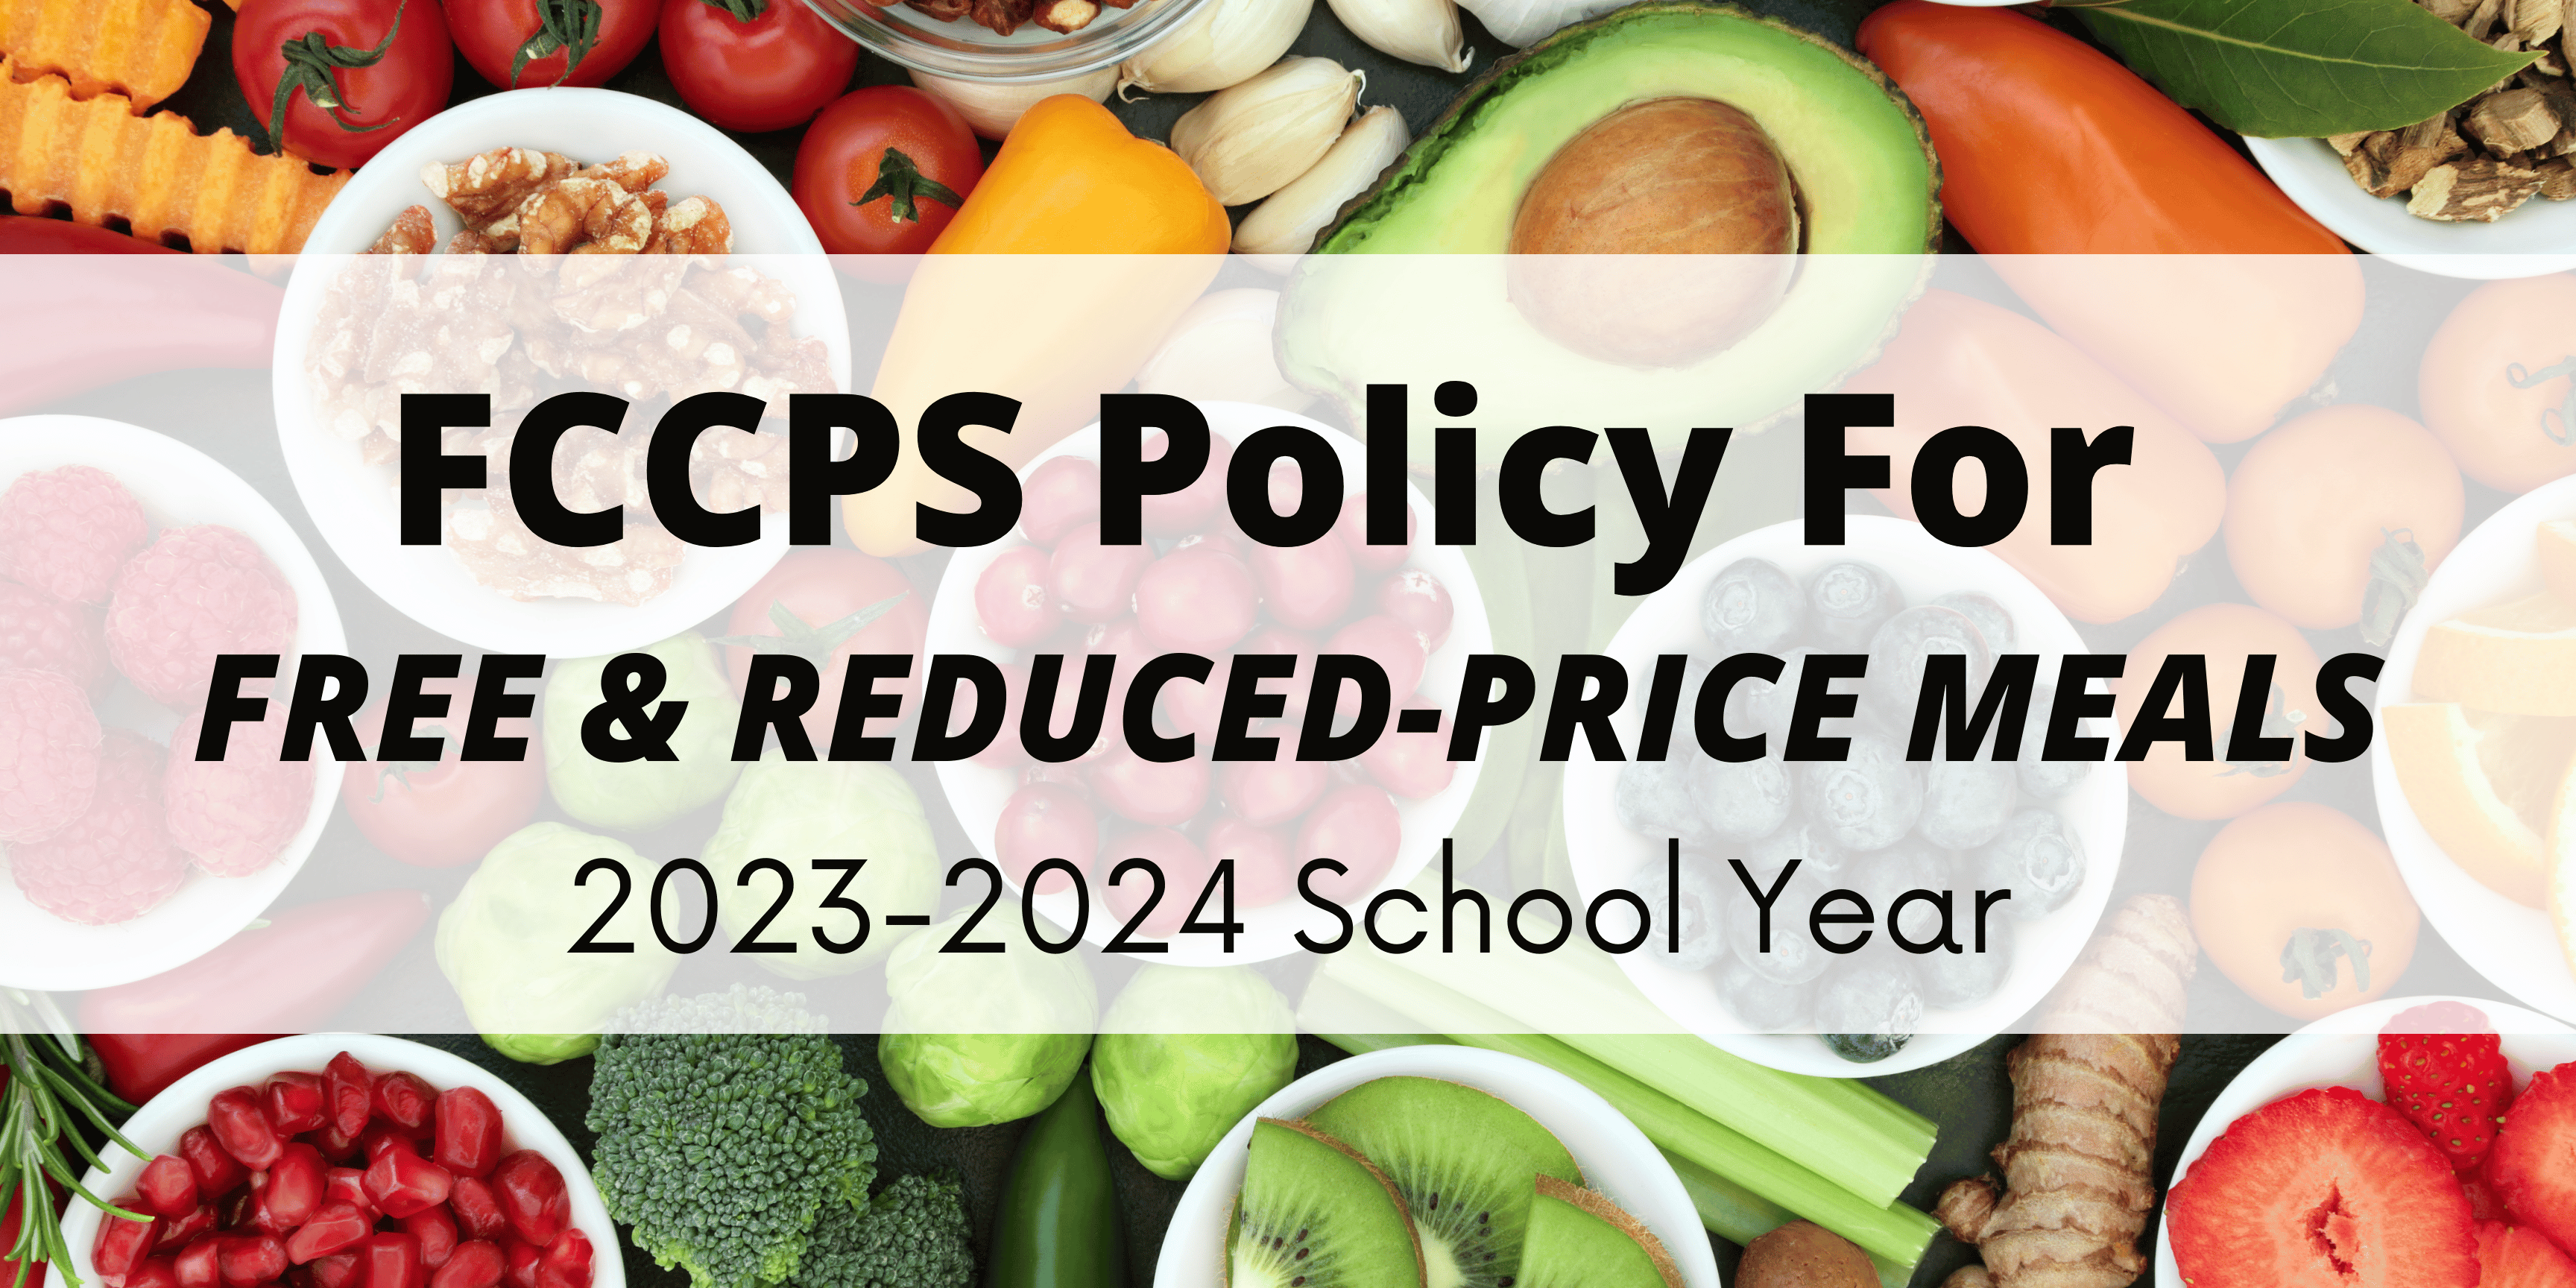 Reduced-price meals